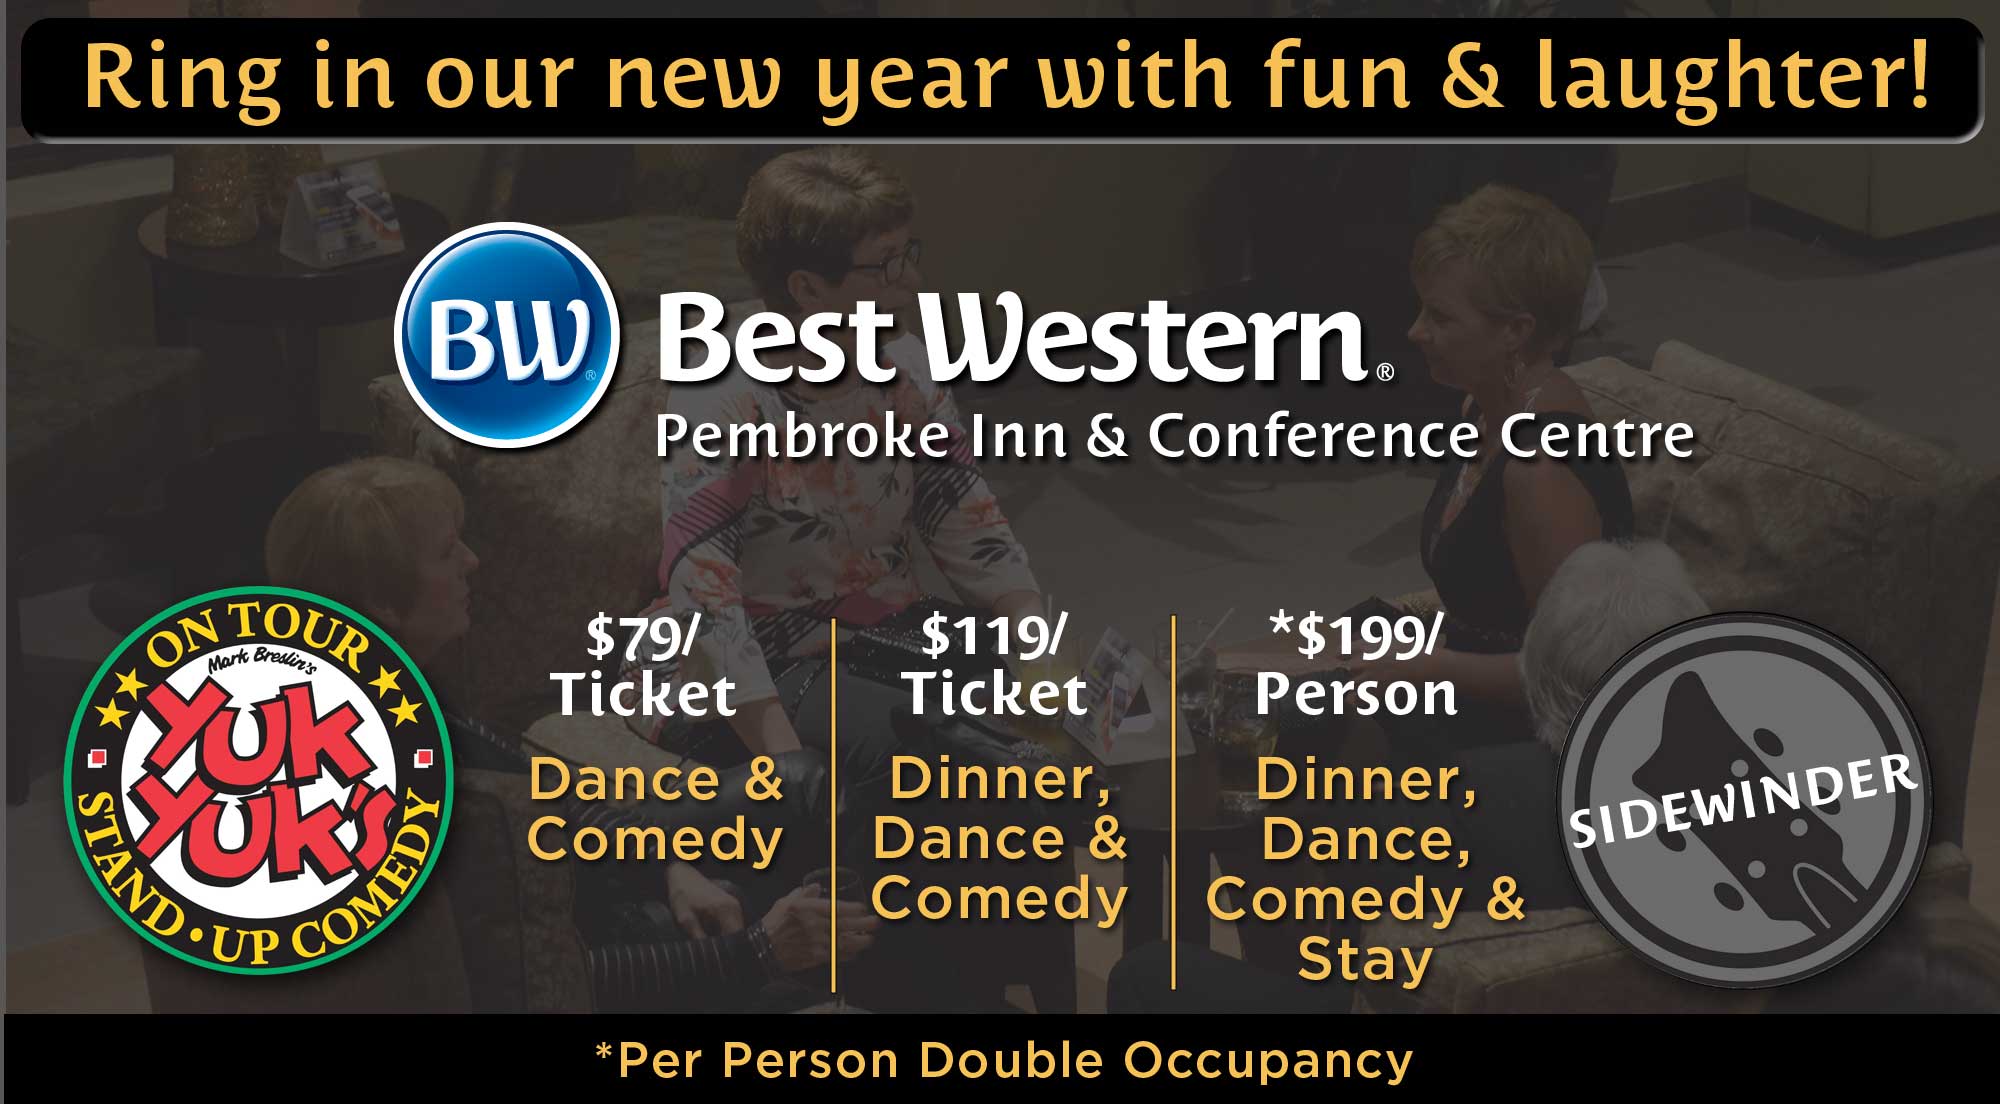 Book your fun & exciting new year's party at Best Western Pembroke Inn